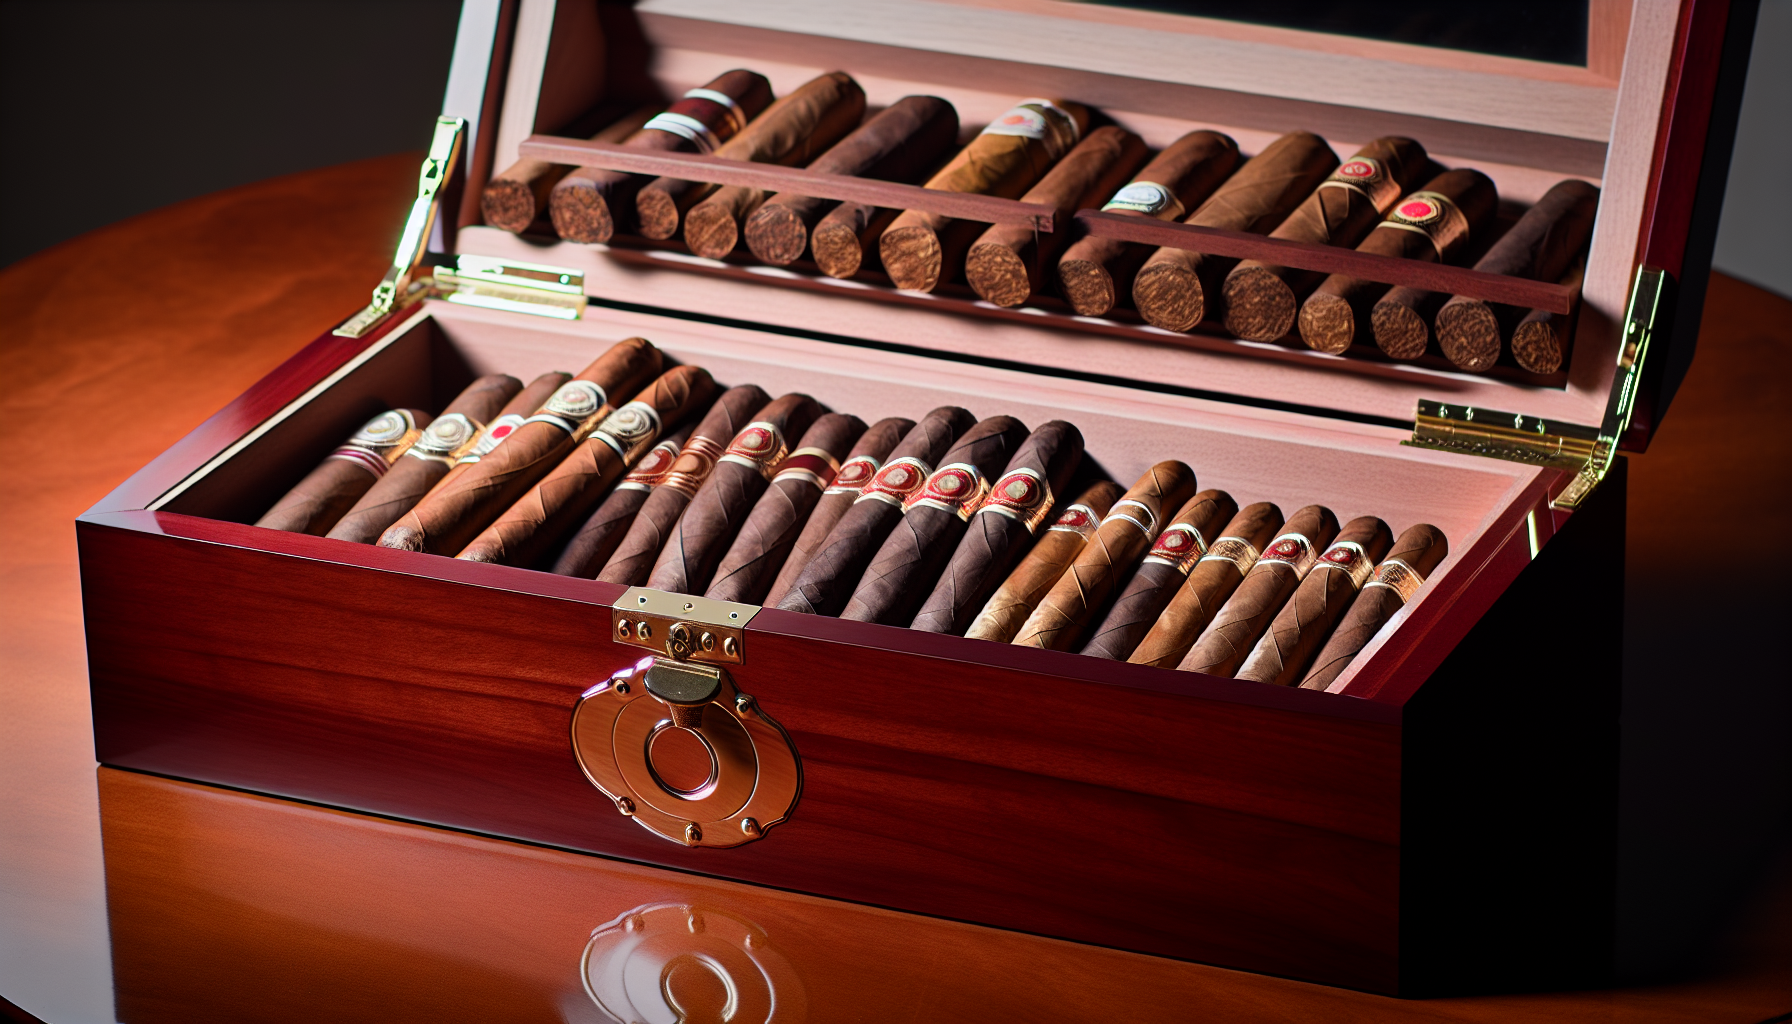 Preserving the aroma and quality of cigars